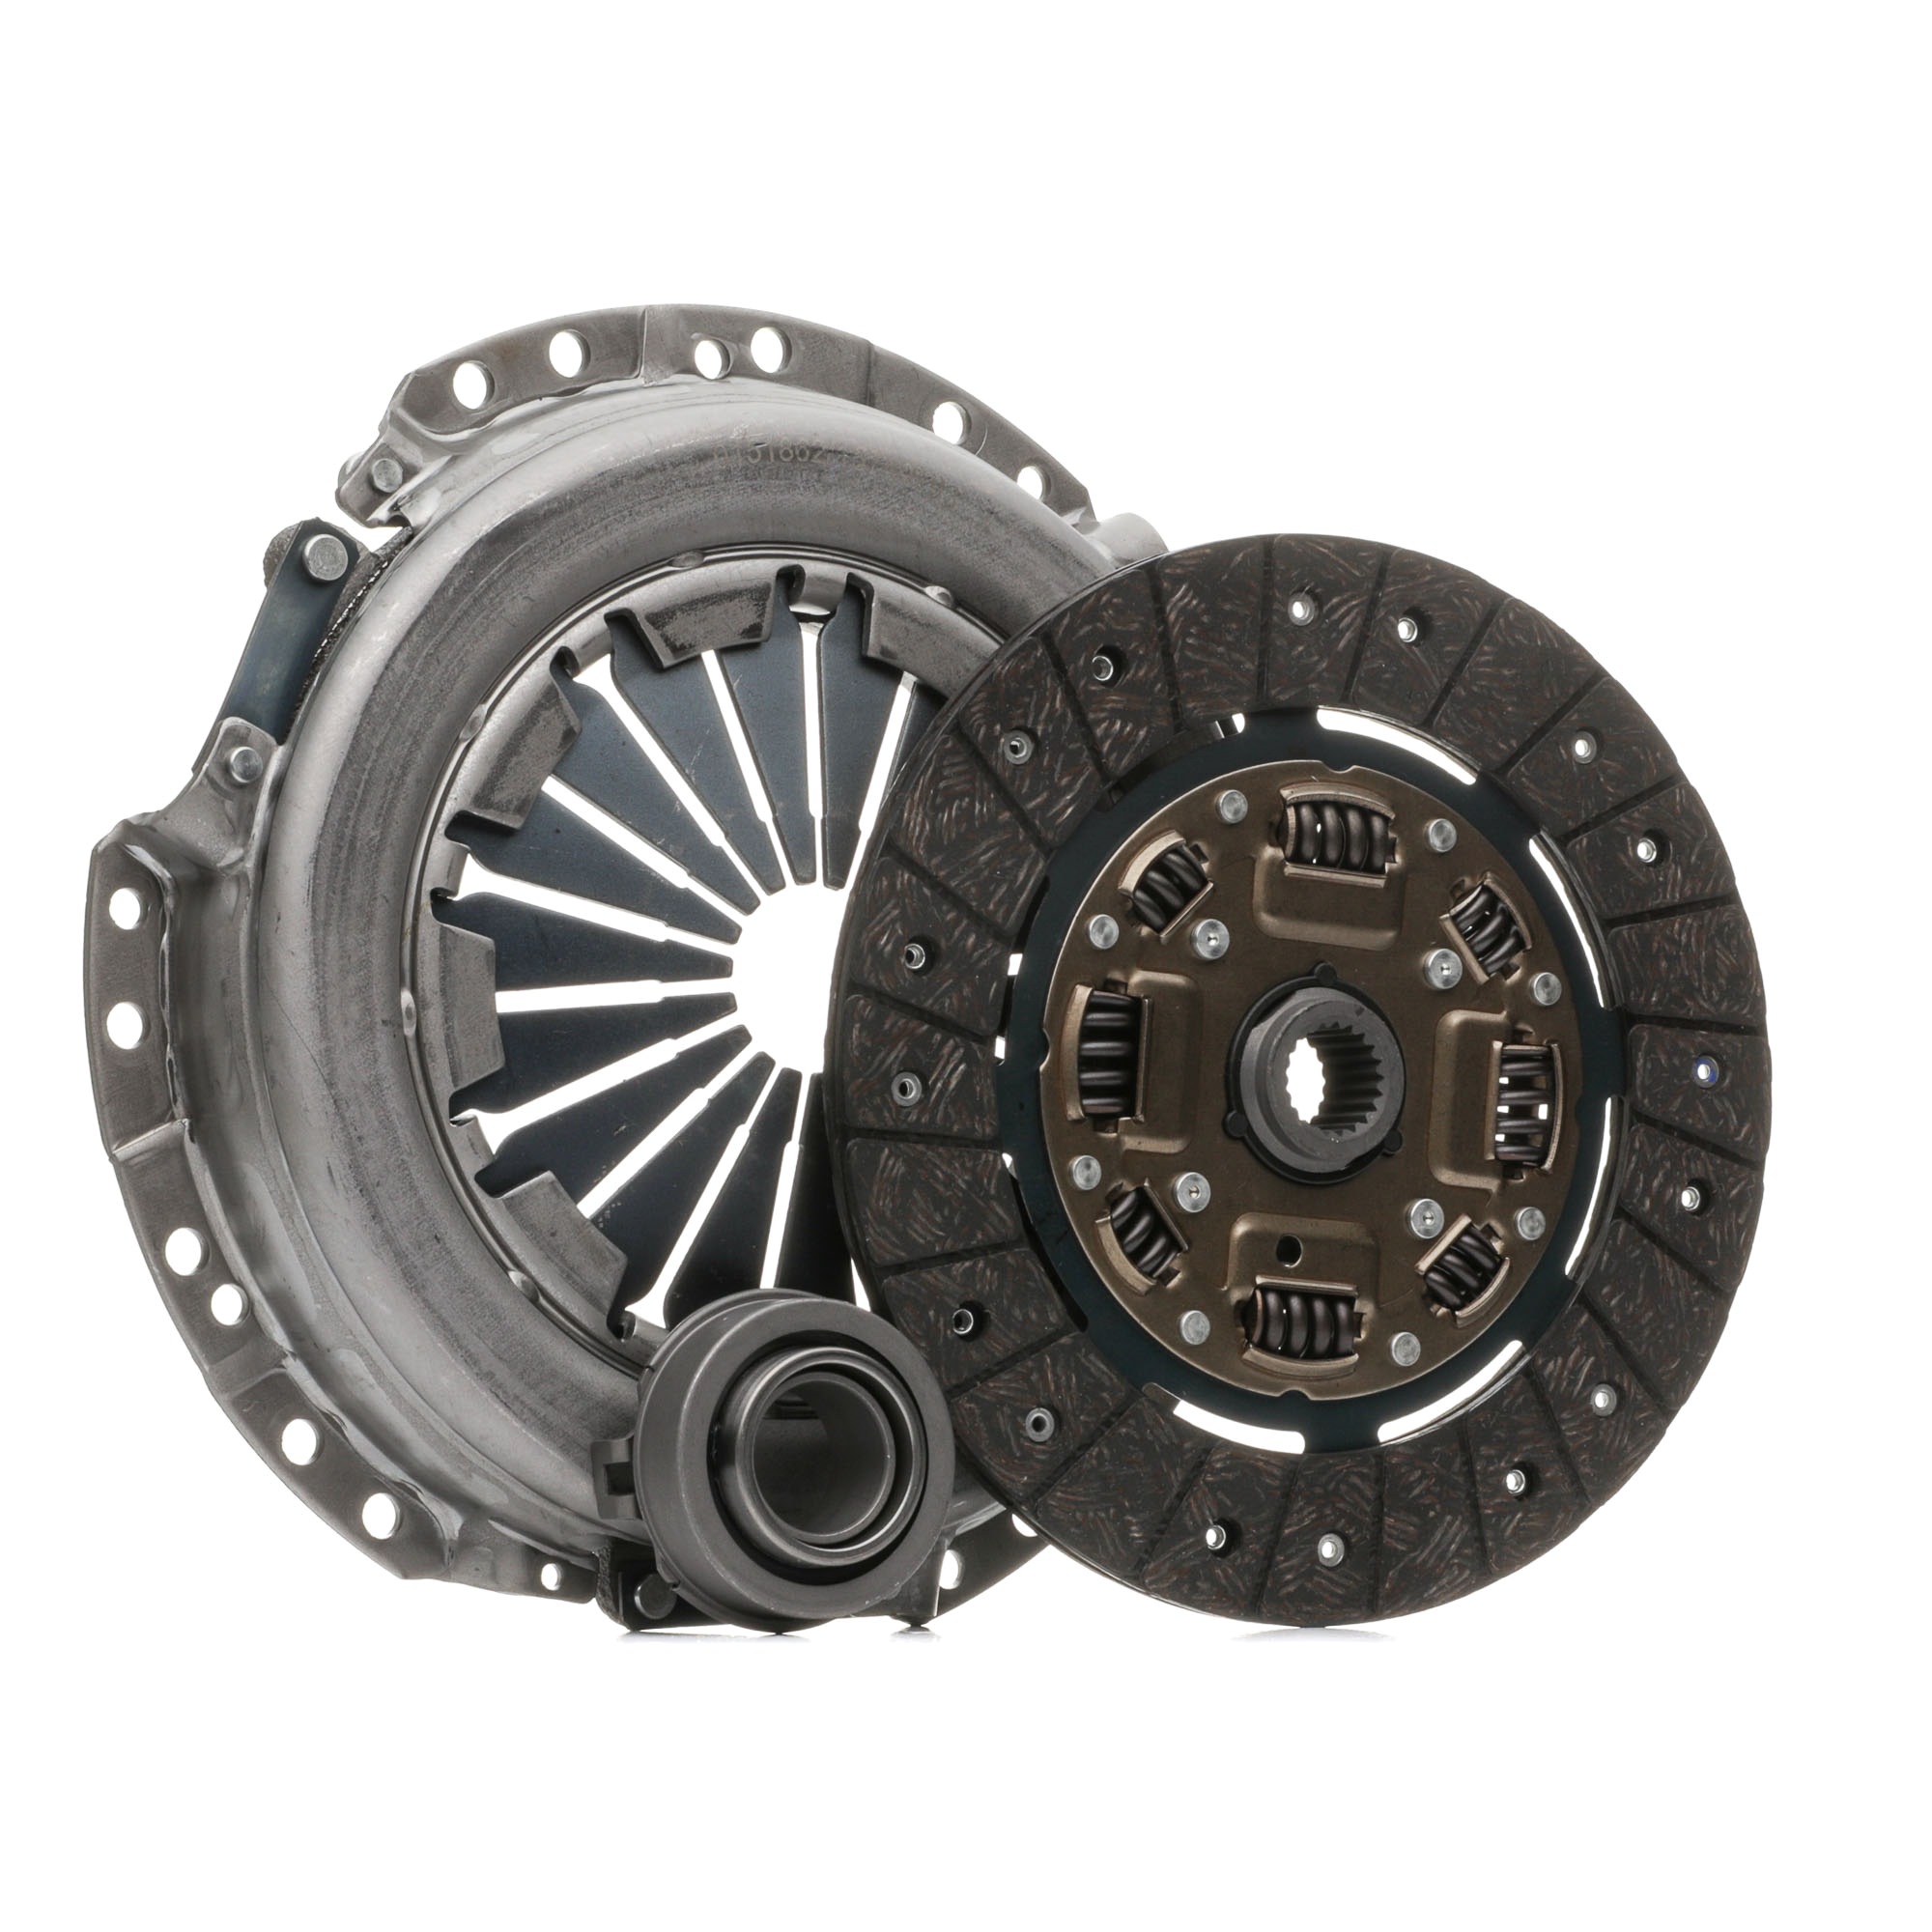 STARK SKCK-0100887 Clutch kit CITROËN experience and price